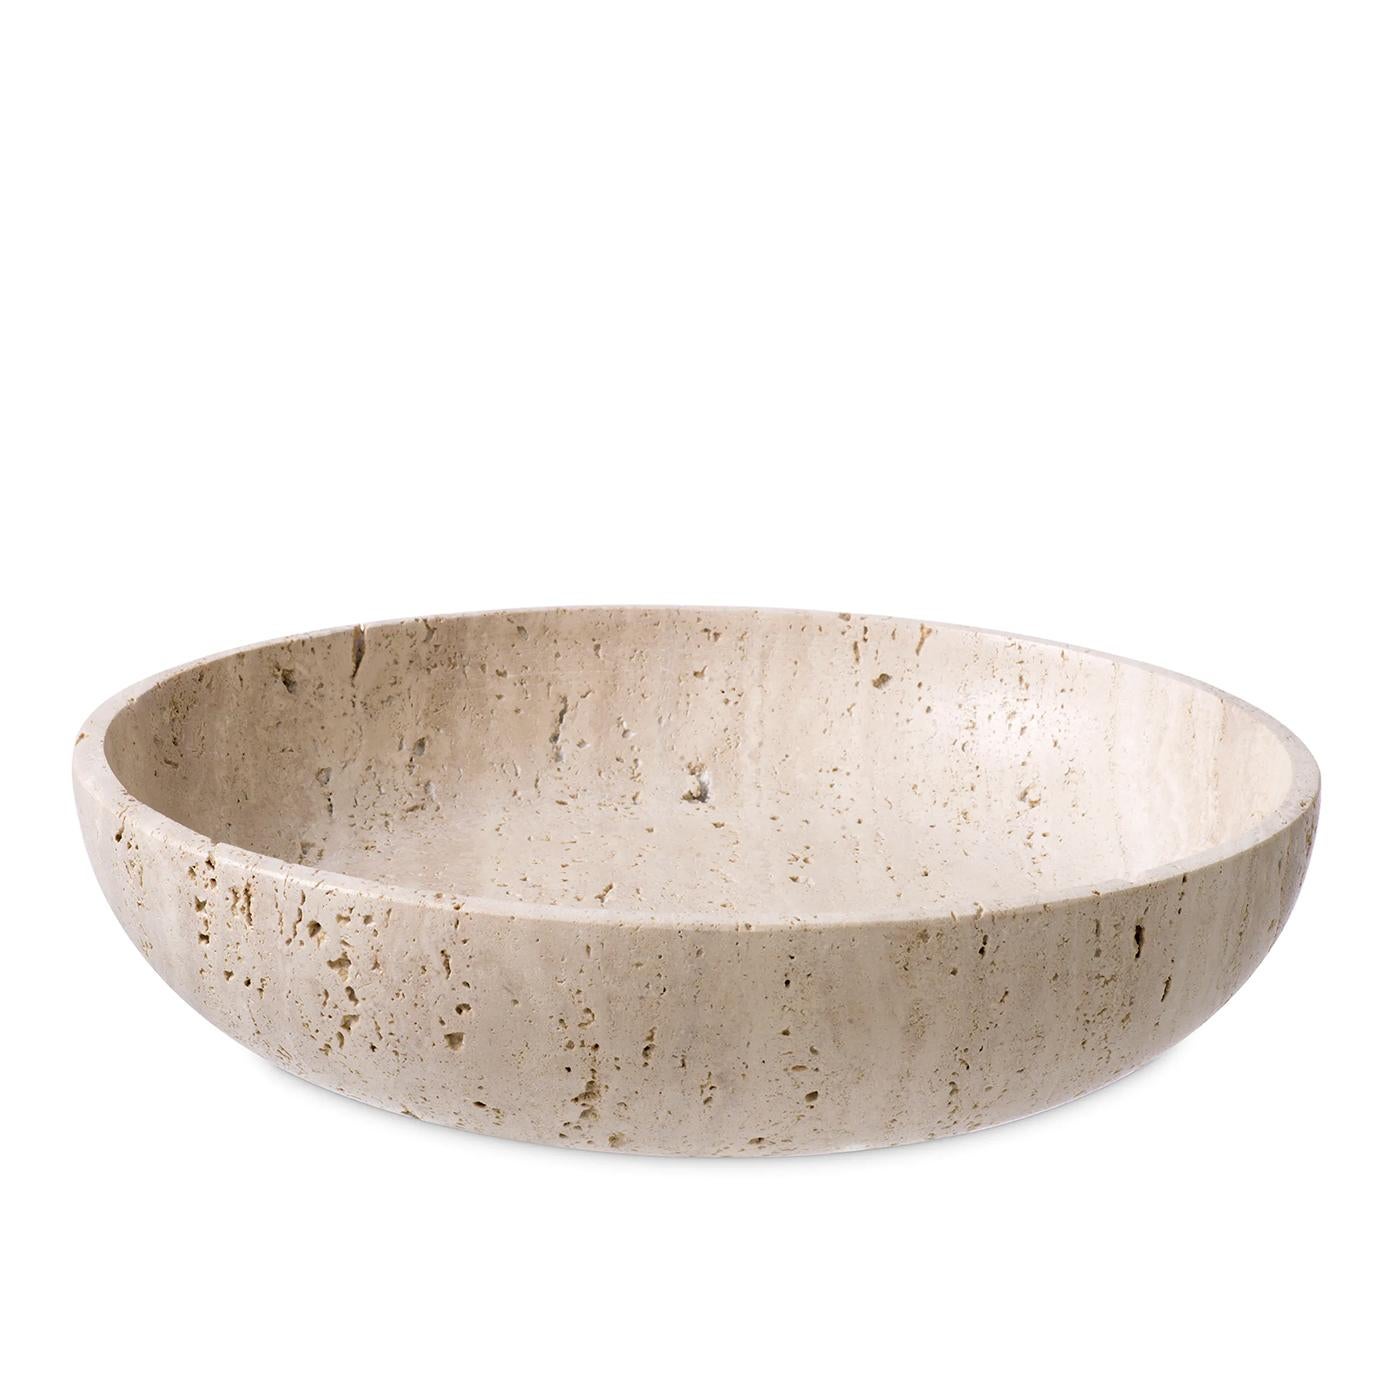 Bowl Lilia travertine all in solid
travertine in polished finish.